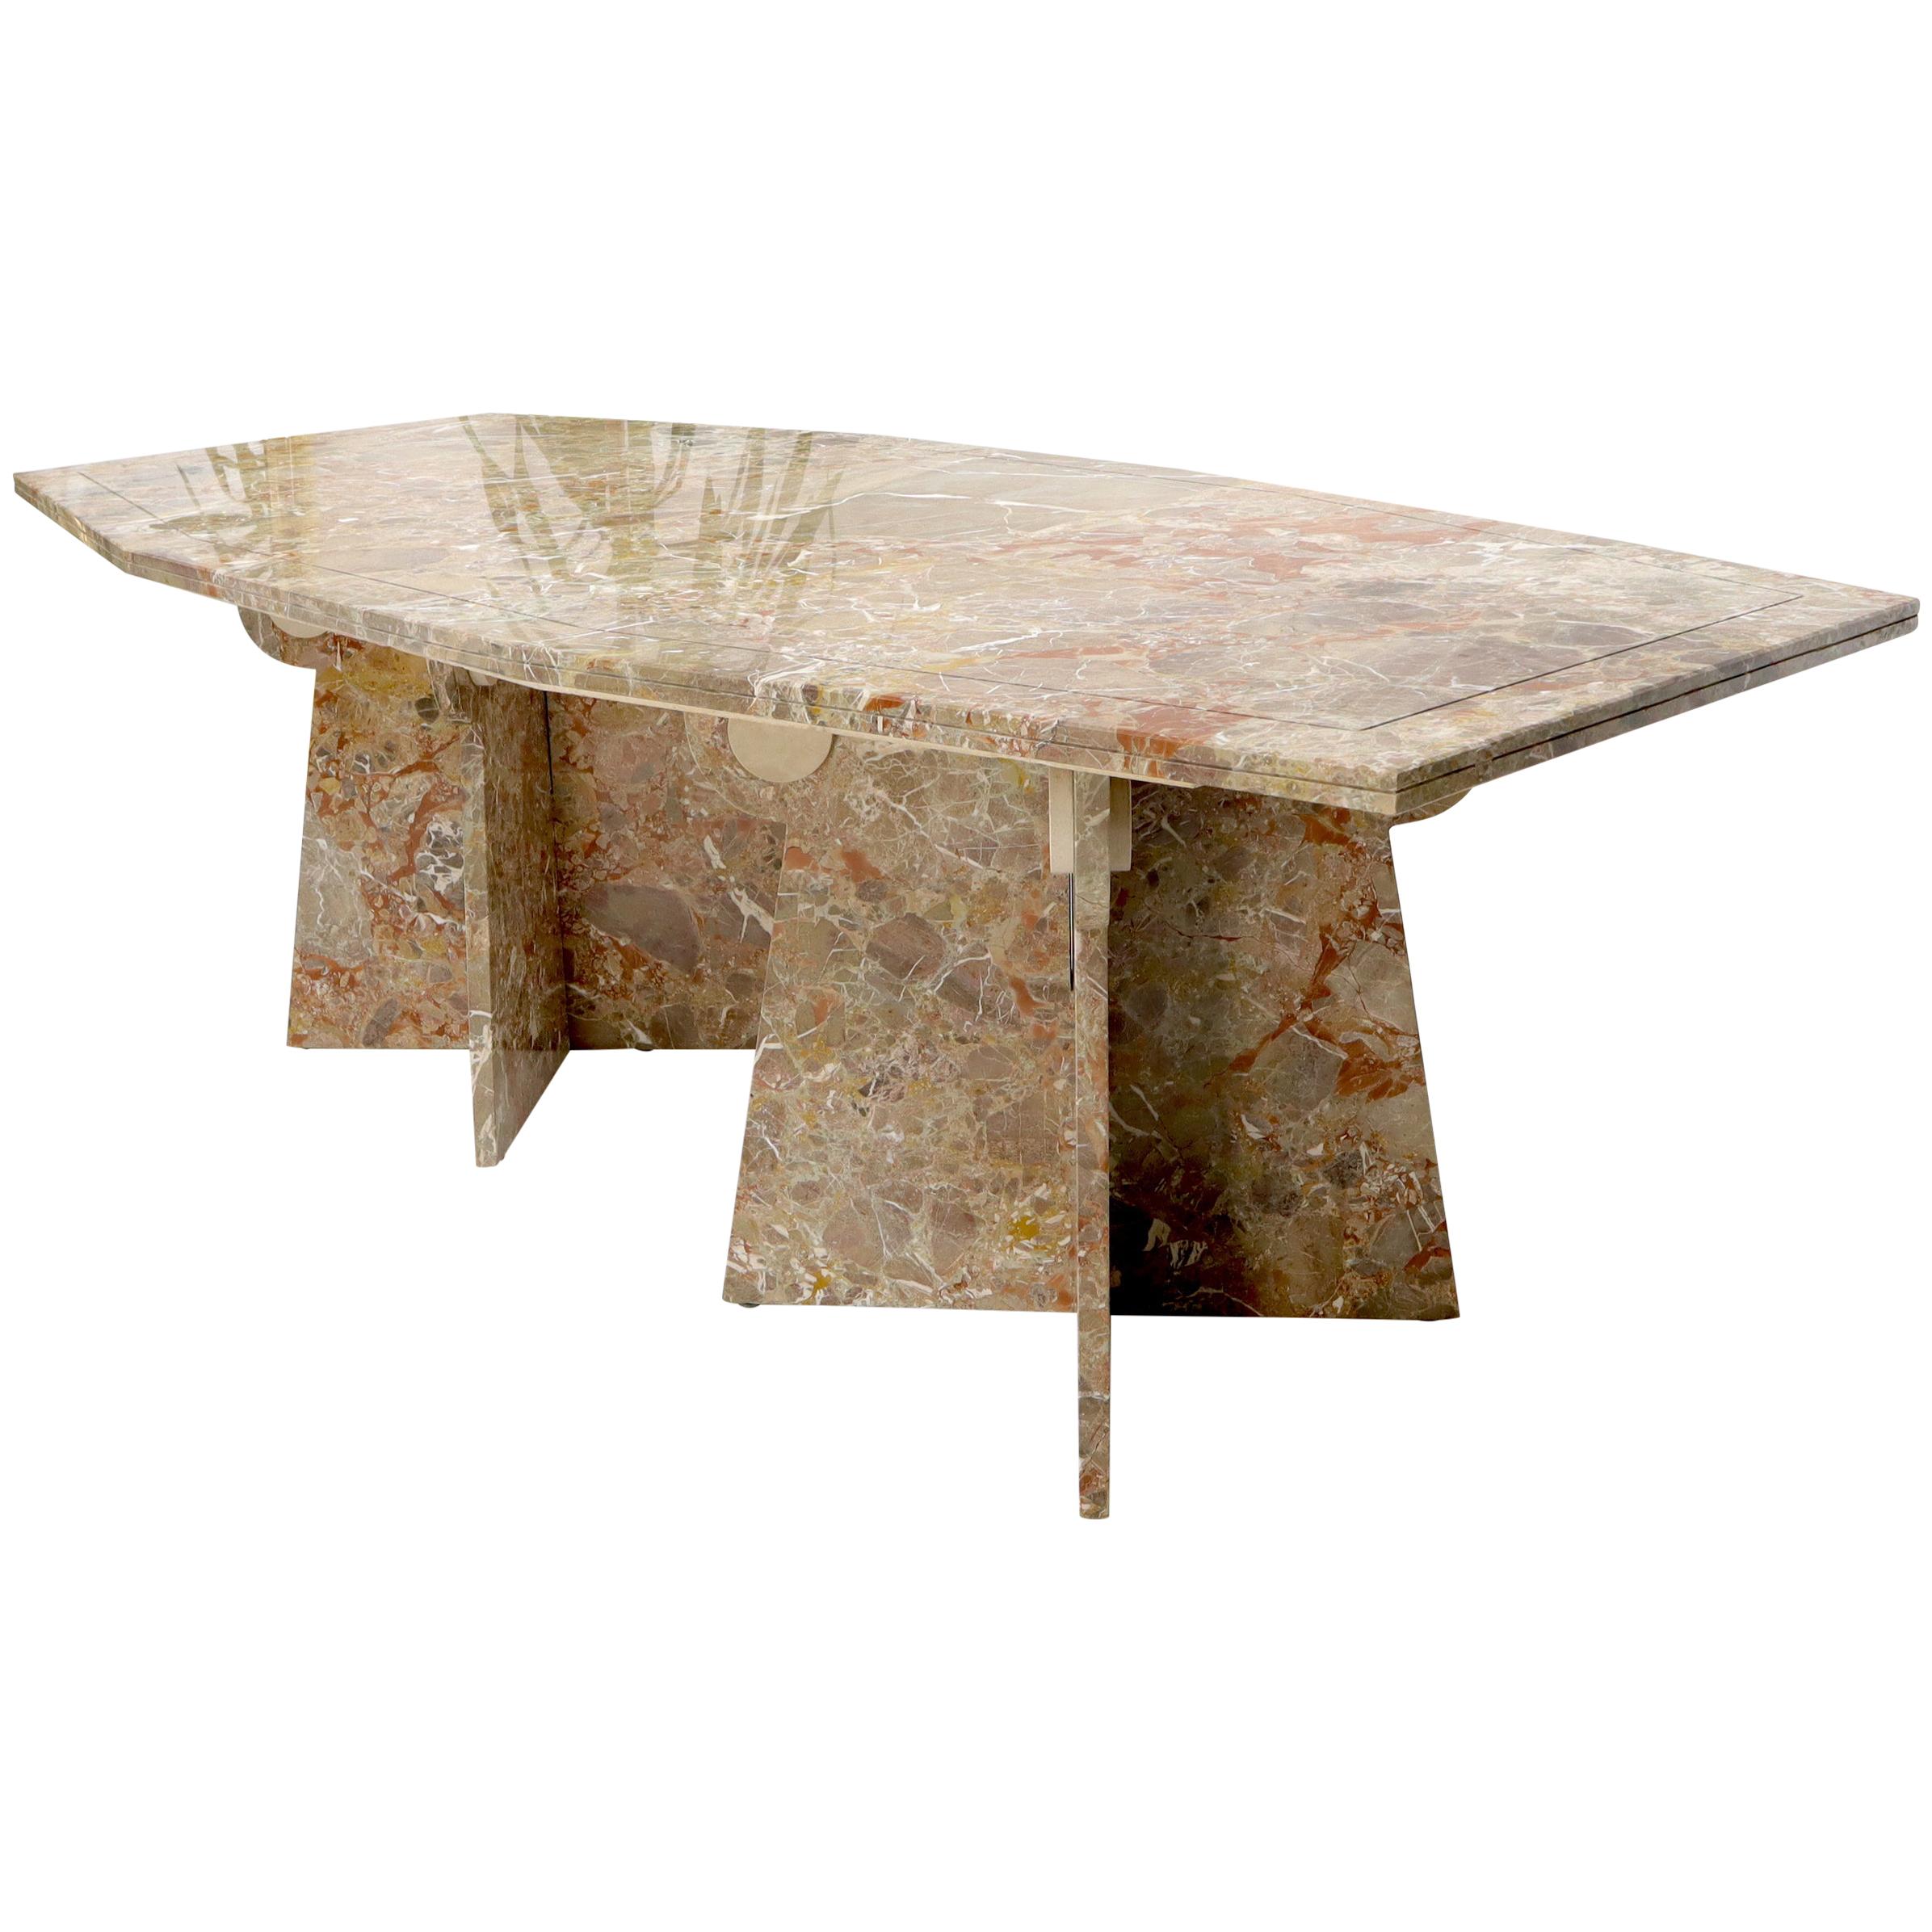 Large Marble Boat Shape Top Dining Conference Table on Cross Shape Bases For Sale